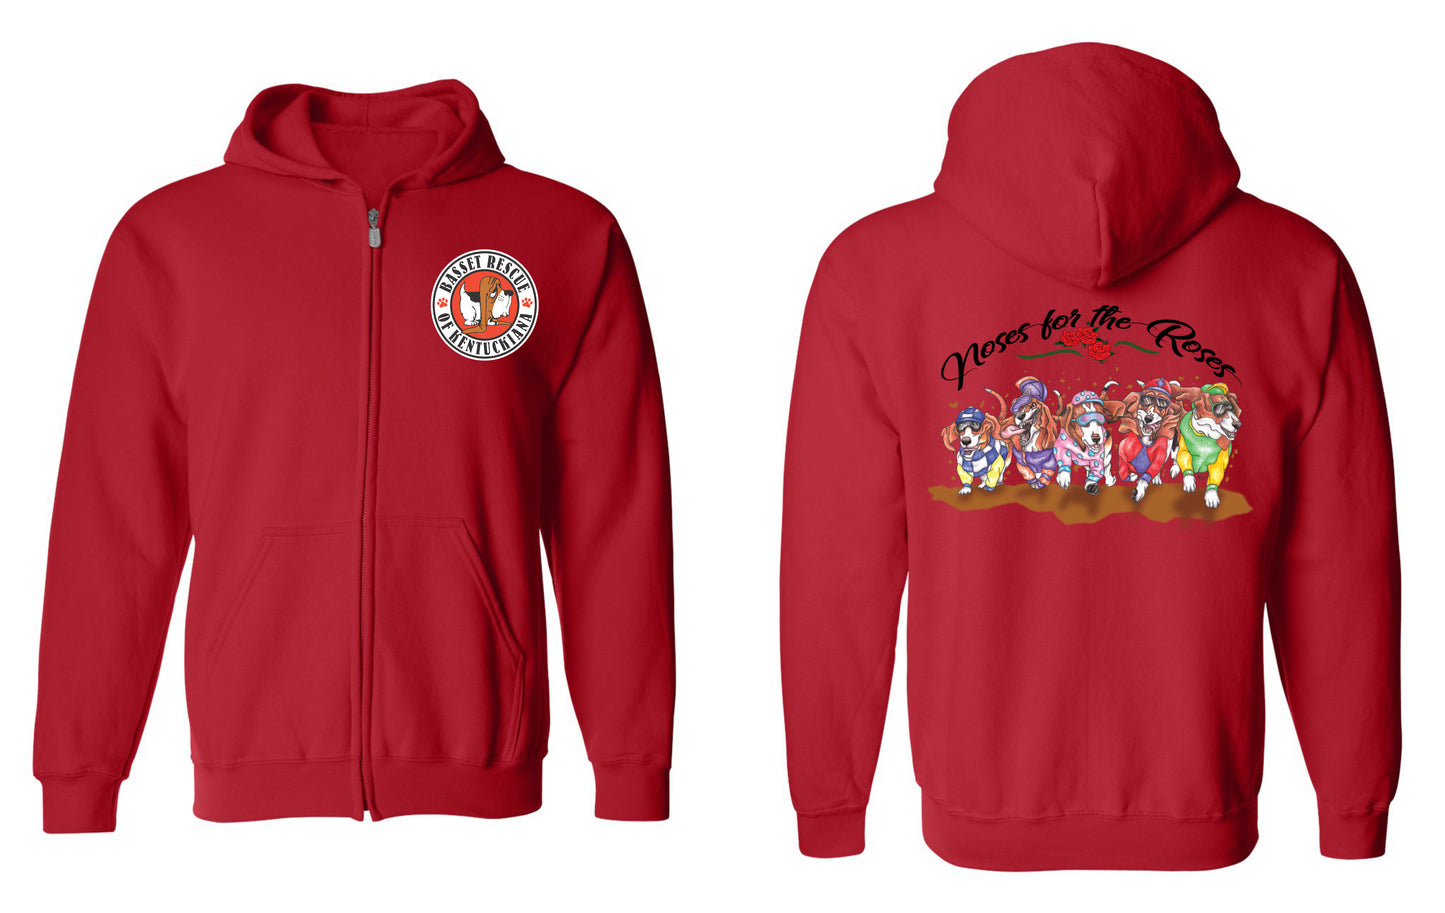 Noses for the Roses Zip Up Hoodies *3 COLORS*